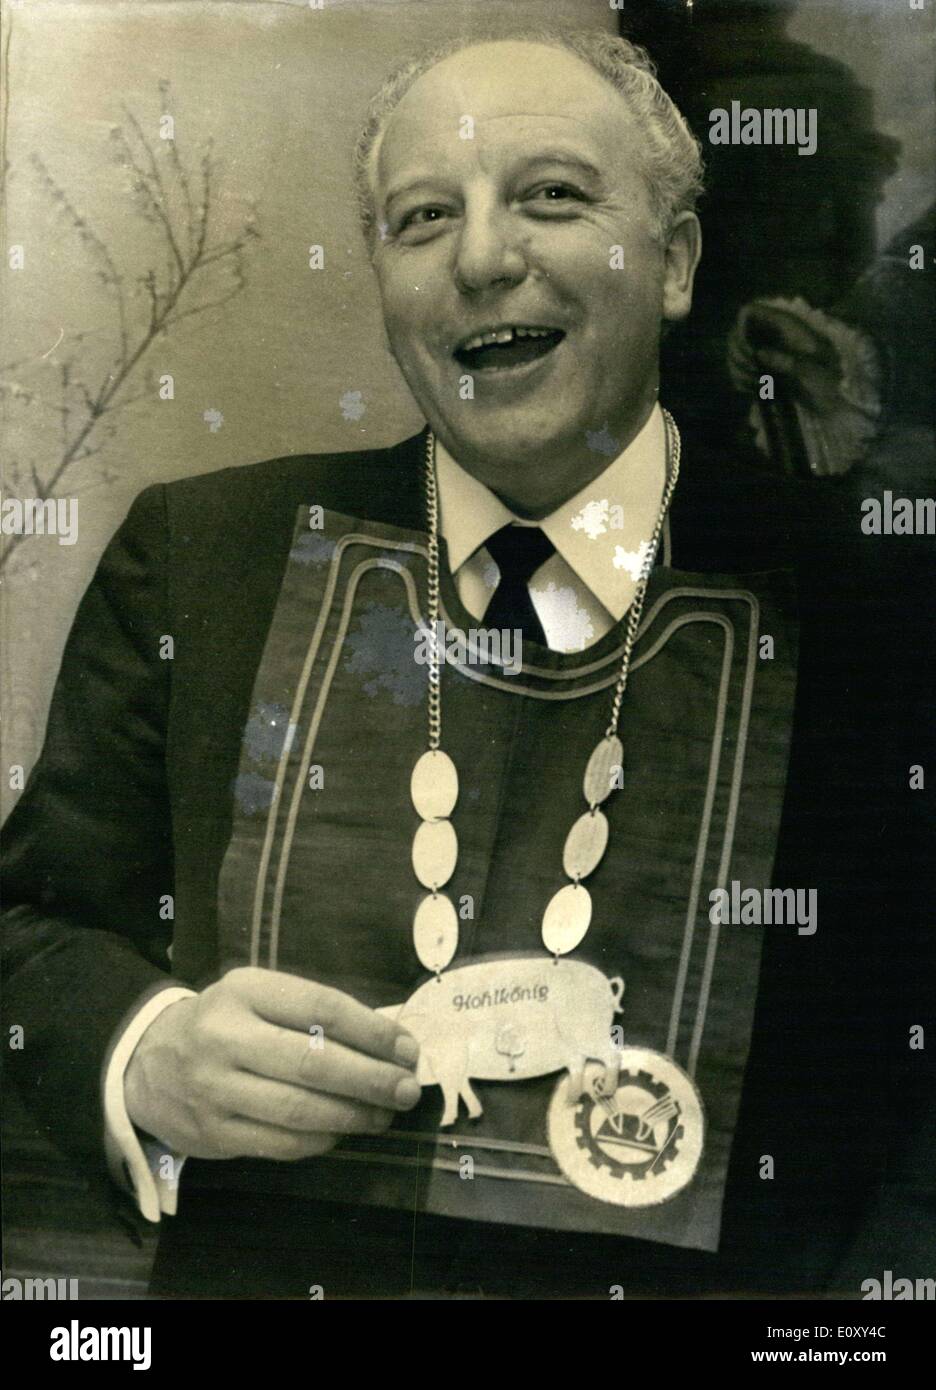 Jan. 23, 1968 - Pictured here is FdP member and opposition chief Walter Scheel, who was designated the ''kohlkonig'' or ''cabbage king'' at a meeting of an economic politicians' club in Bonn. He is rather proud of his new title and is pictured here with a bib and his ''king's order. Stock Photo